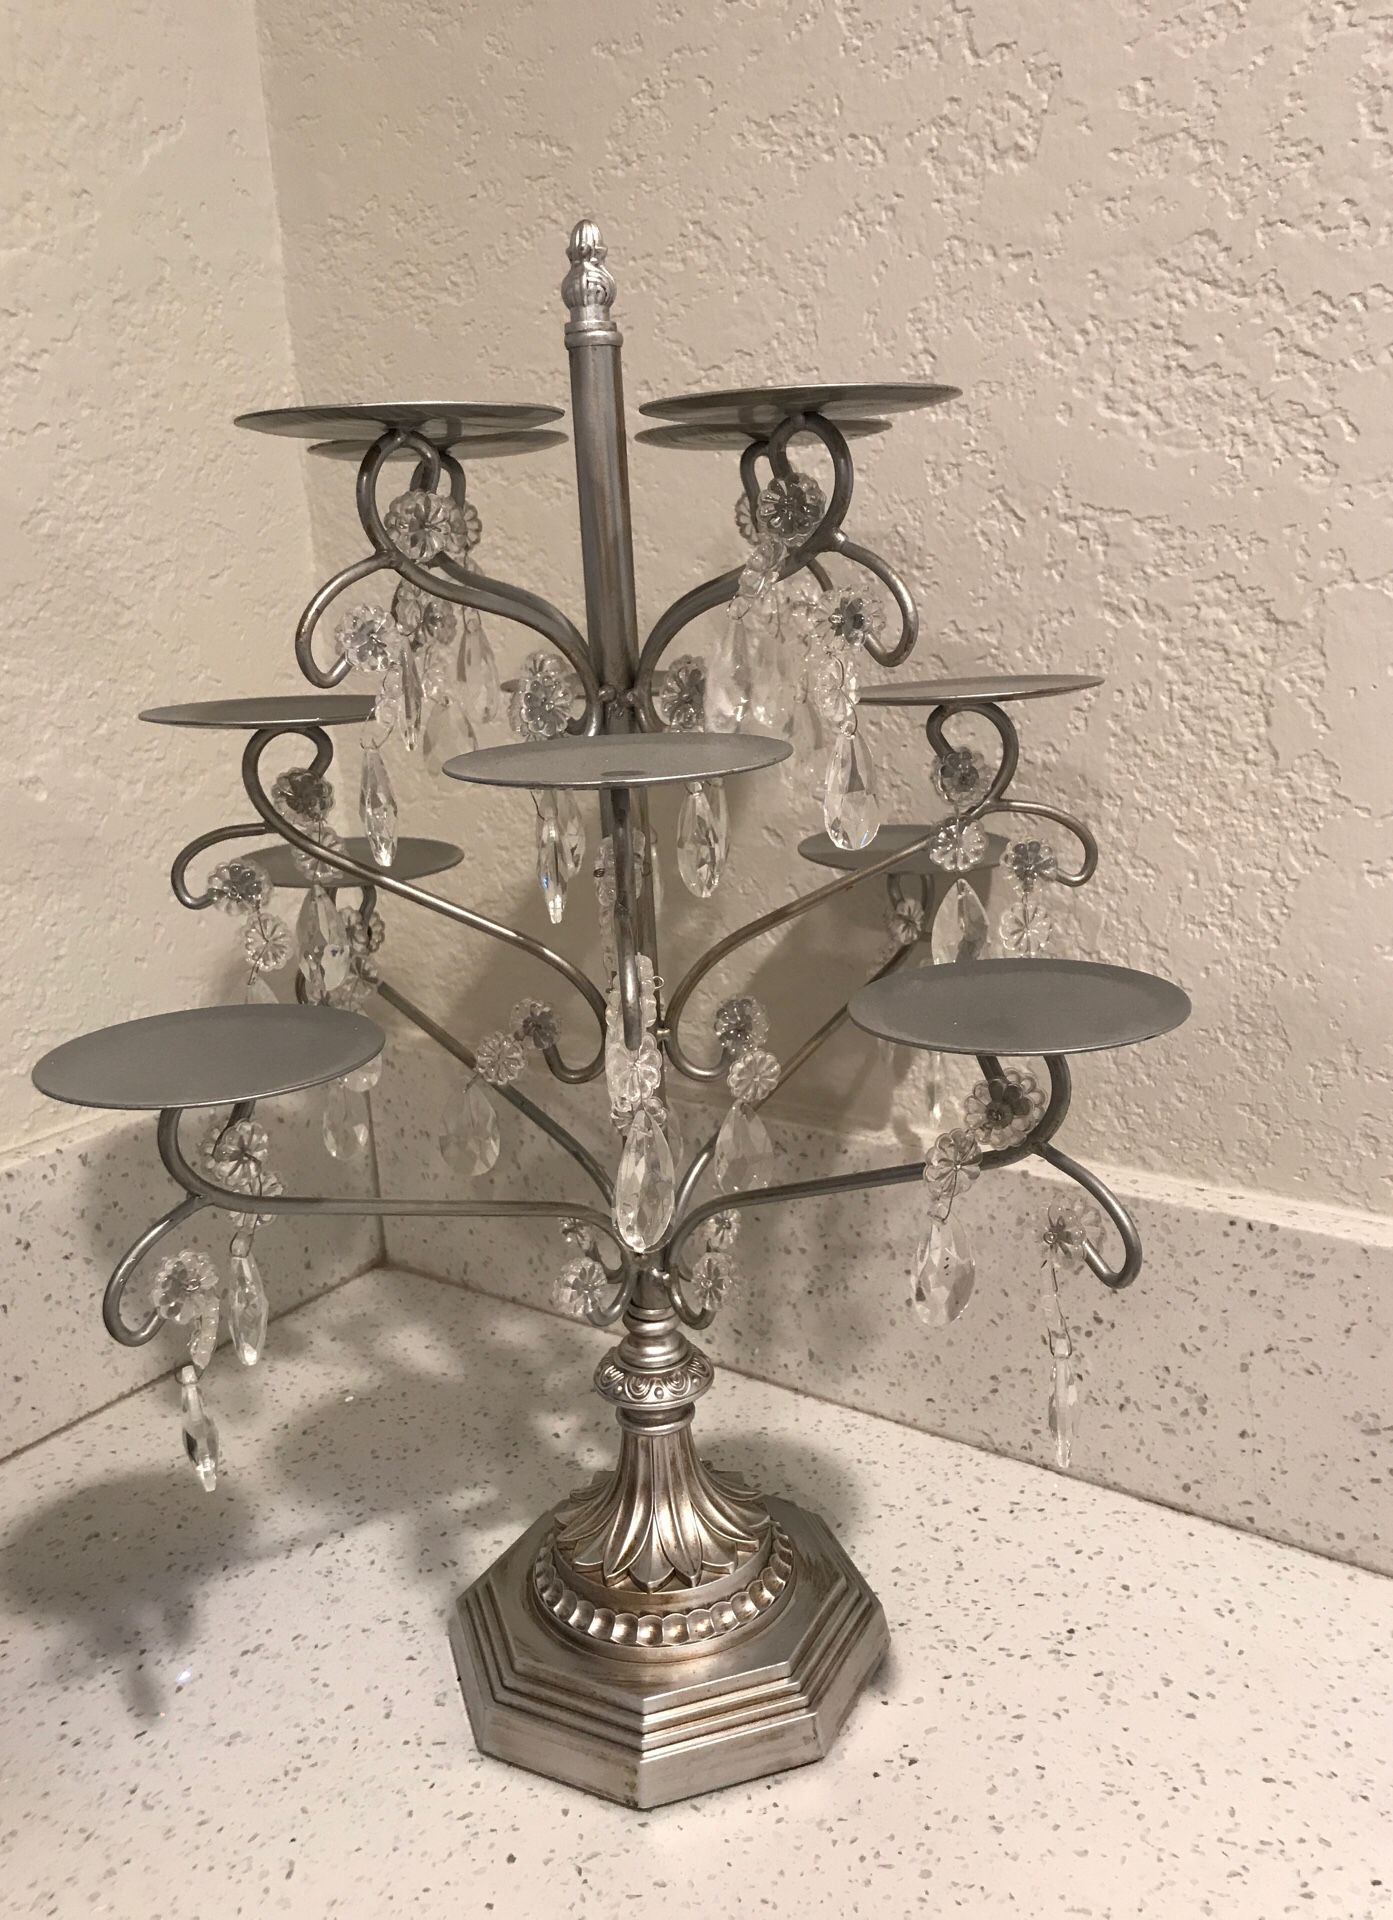 Cupcake holder or candles